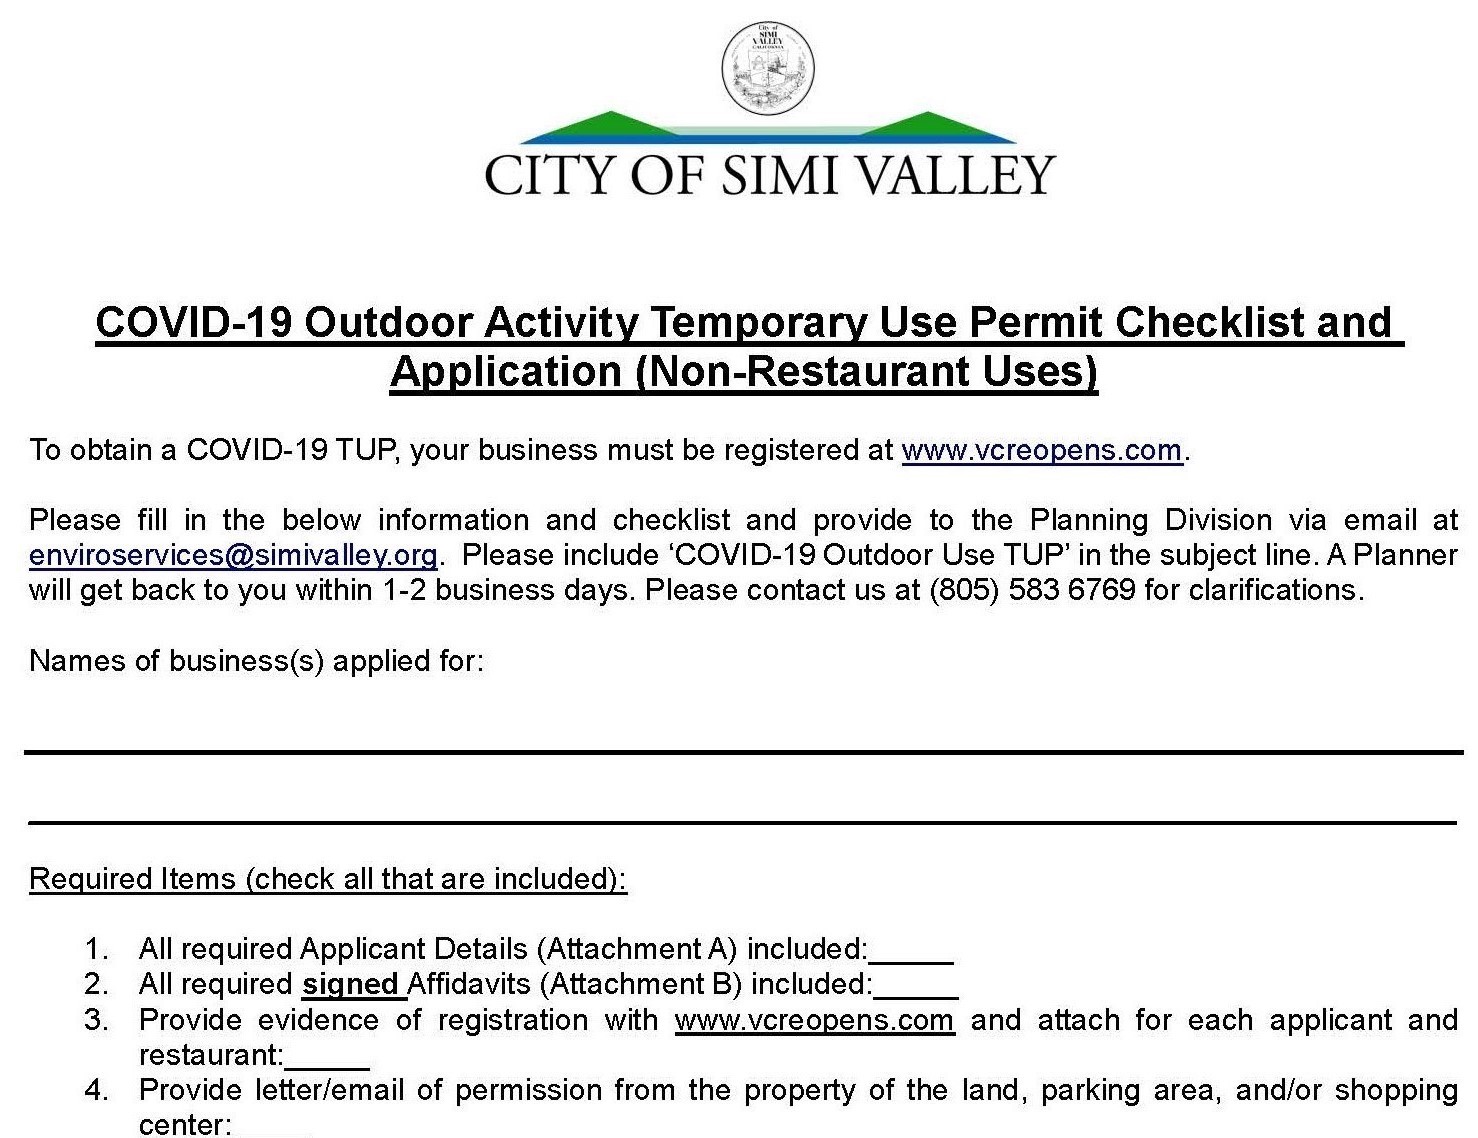 COVID-19 Outdoor Activity Temporary Use Permit Checklist and Application (Non-Restaurant Uses)